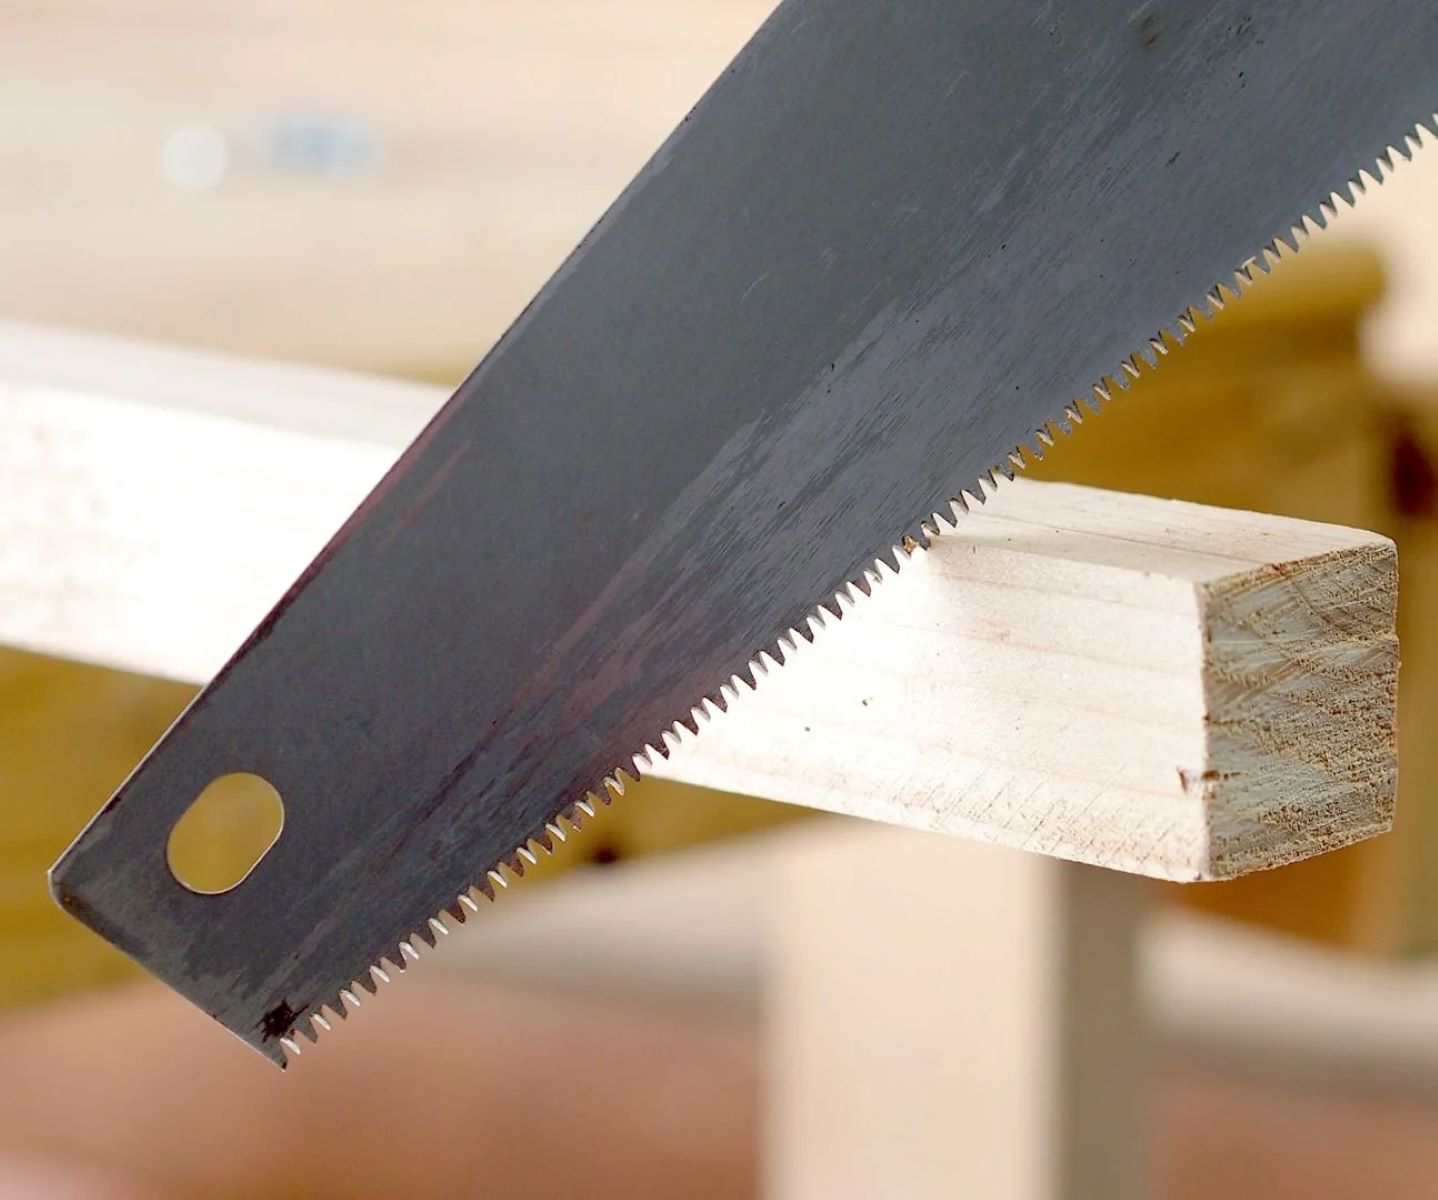 Genius Hack: Cut Trim At A Perfect 45 Degree Angle - No Miter Saw Needed!